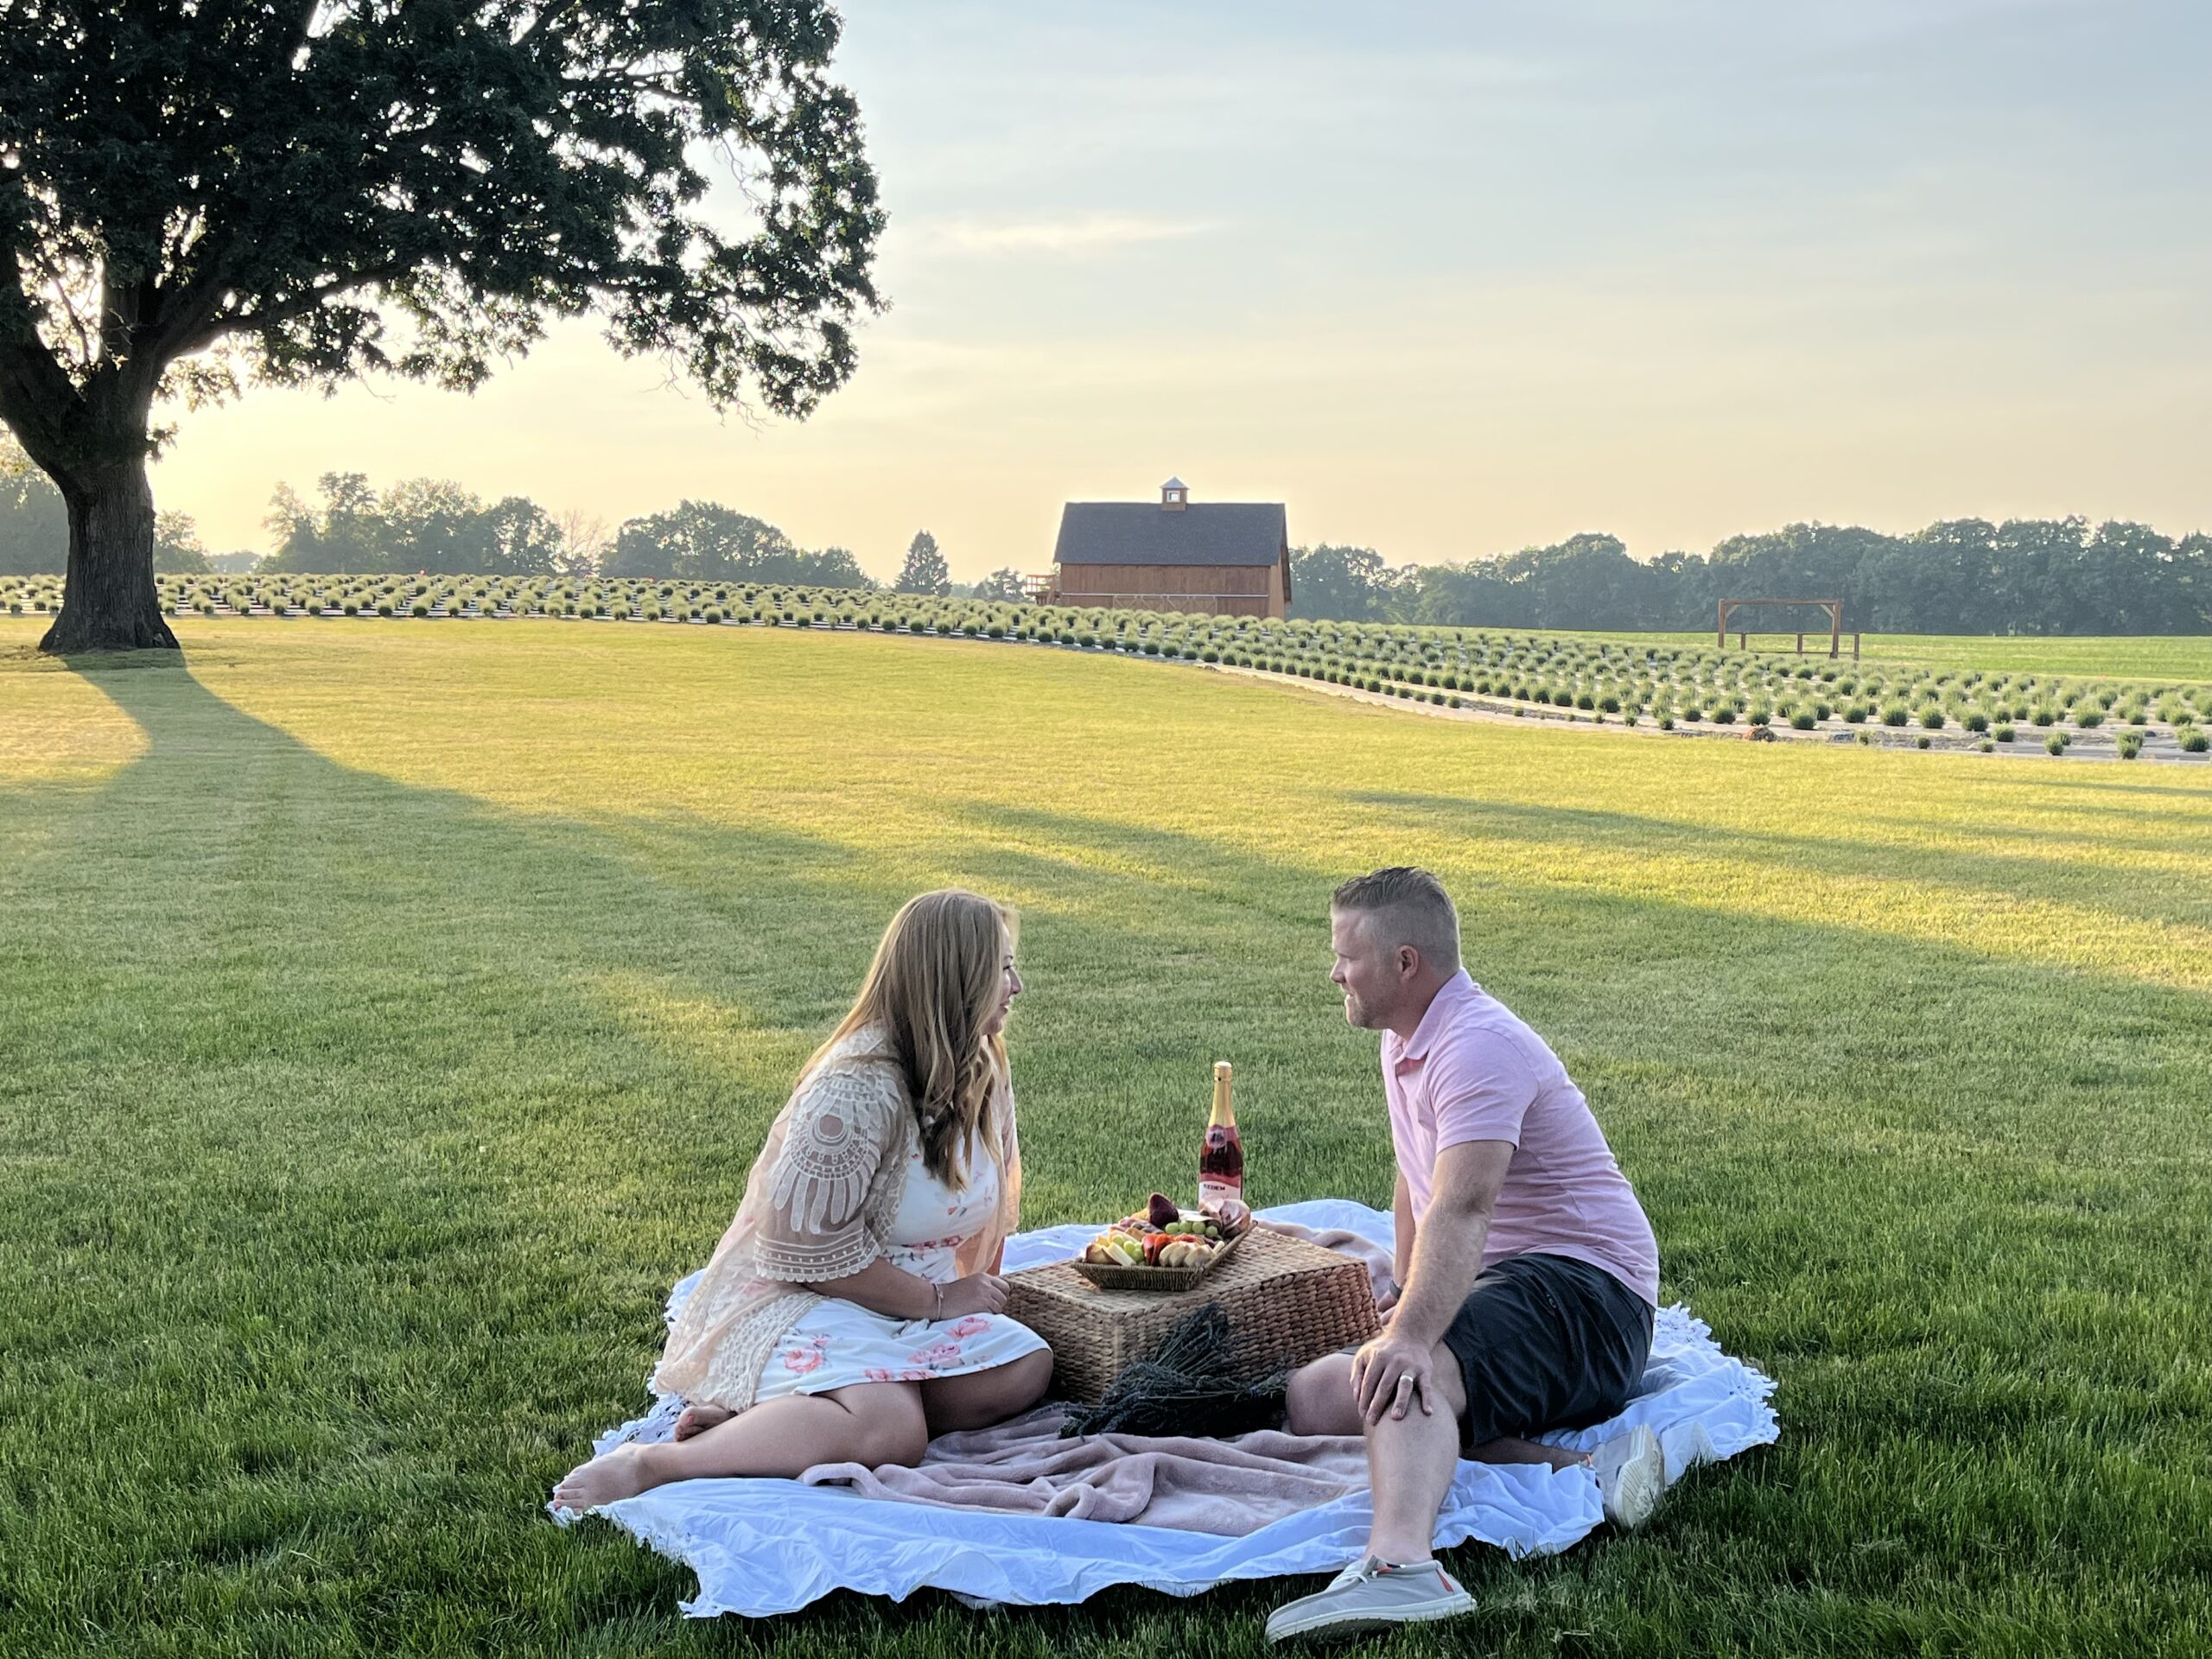 Man and woman sitting on blanket with food with a barn and lavender field in the distance.